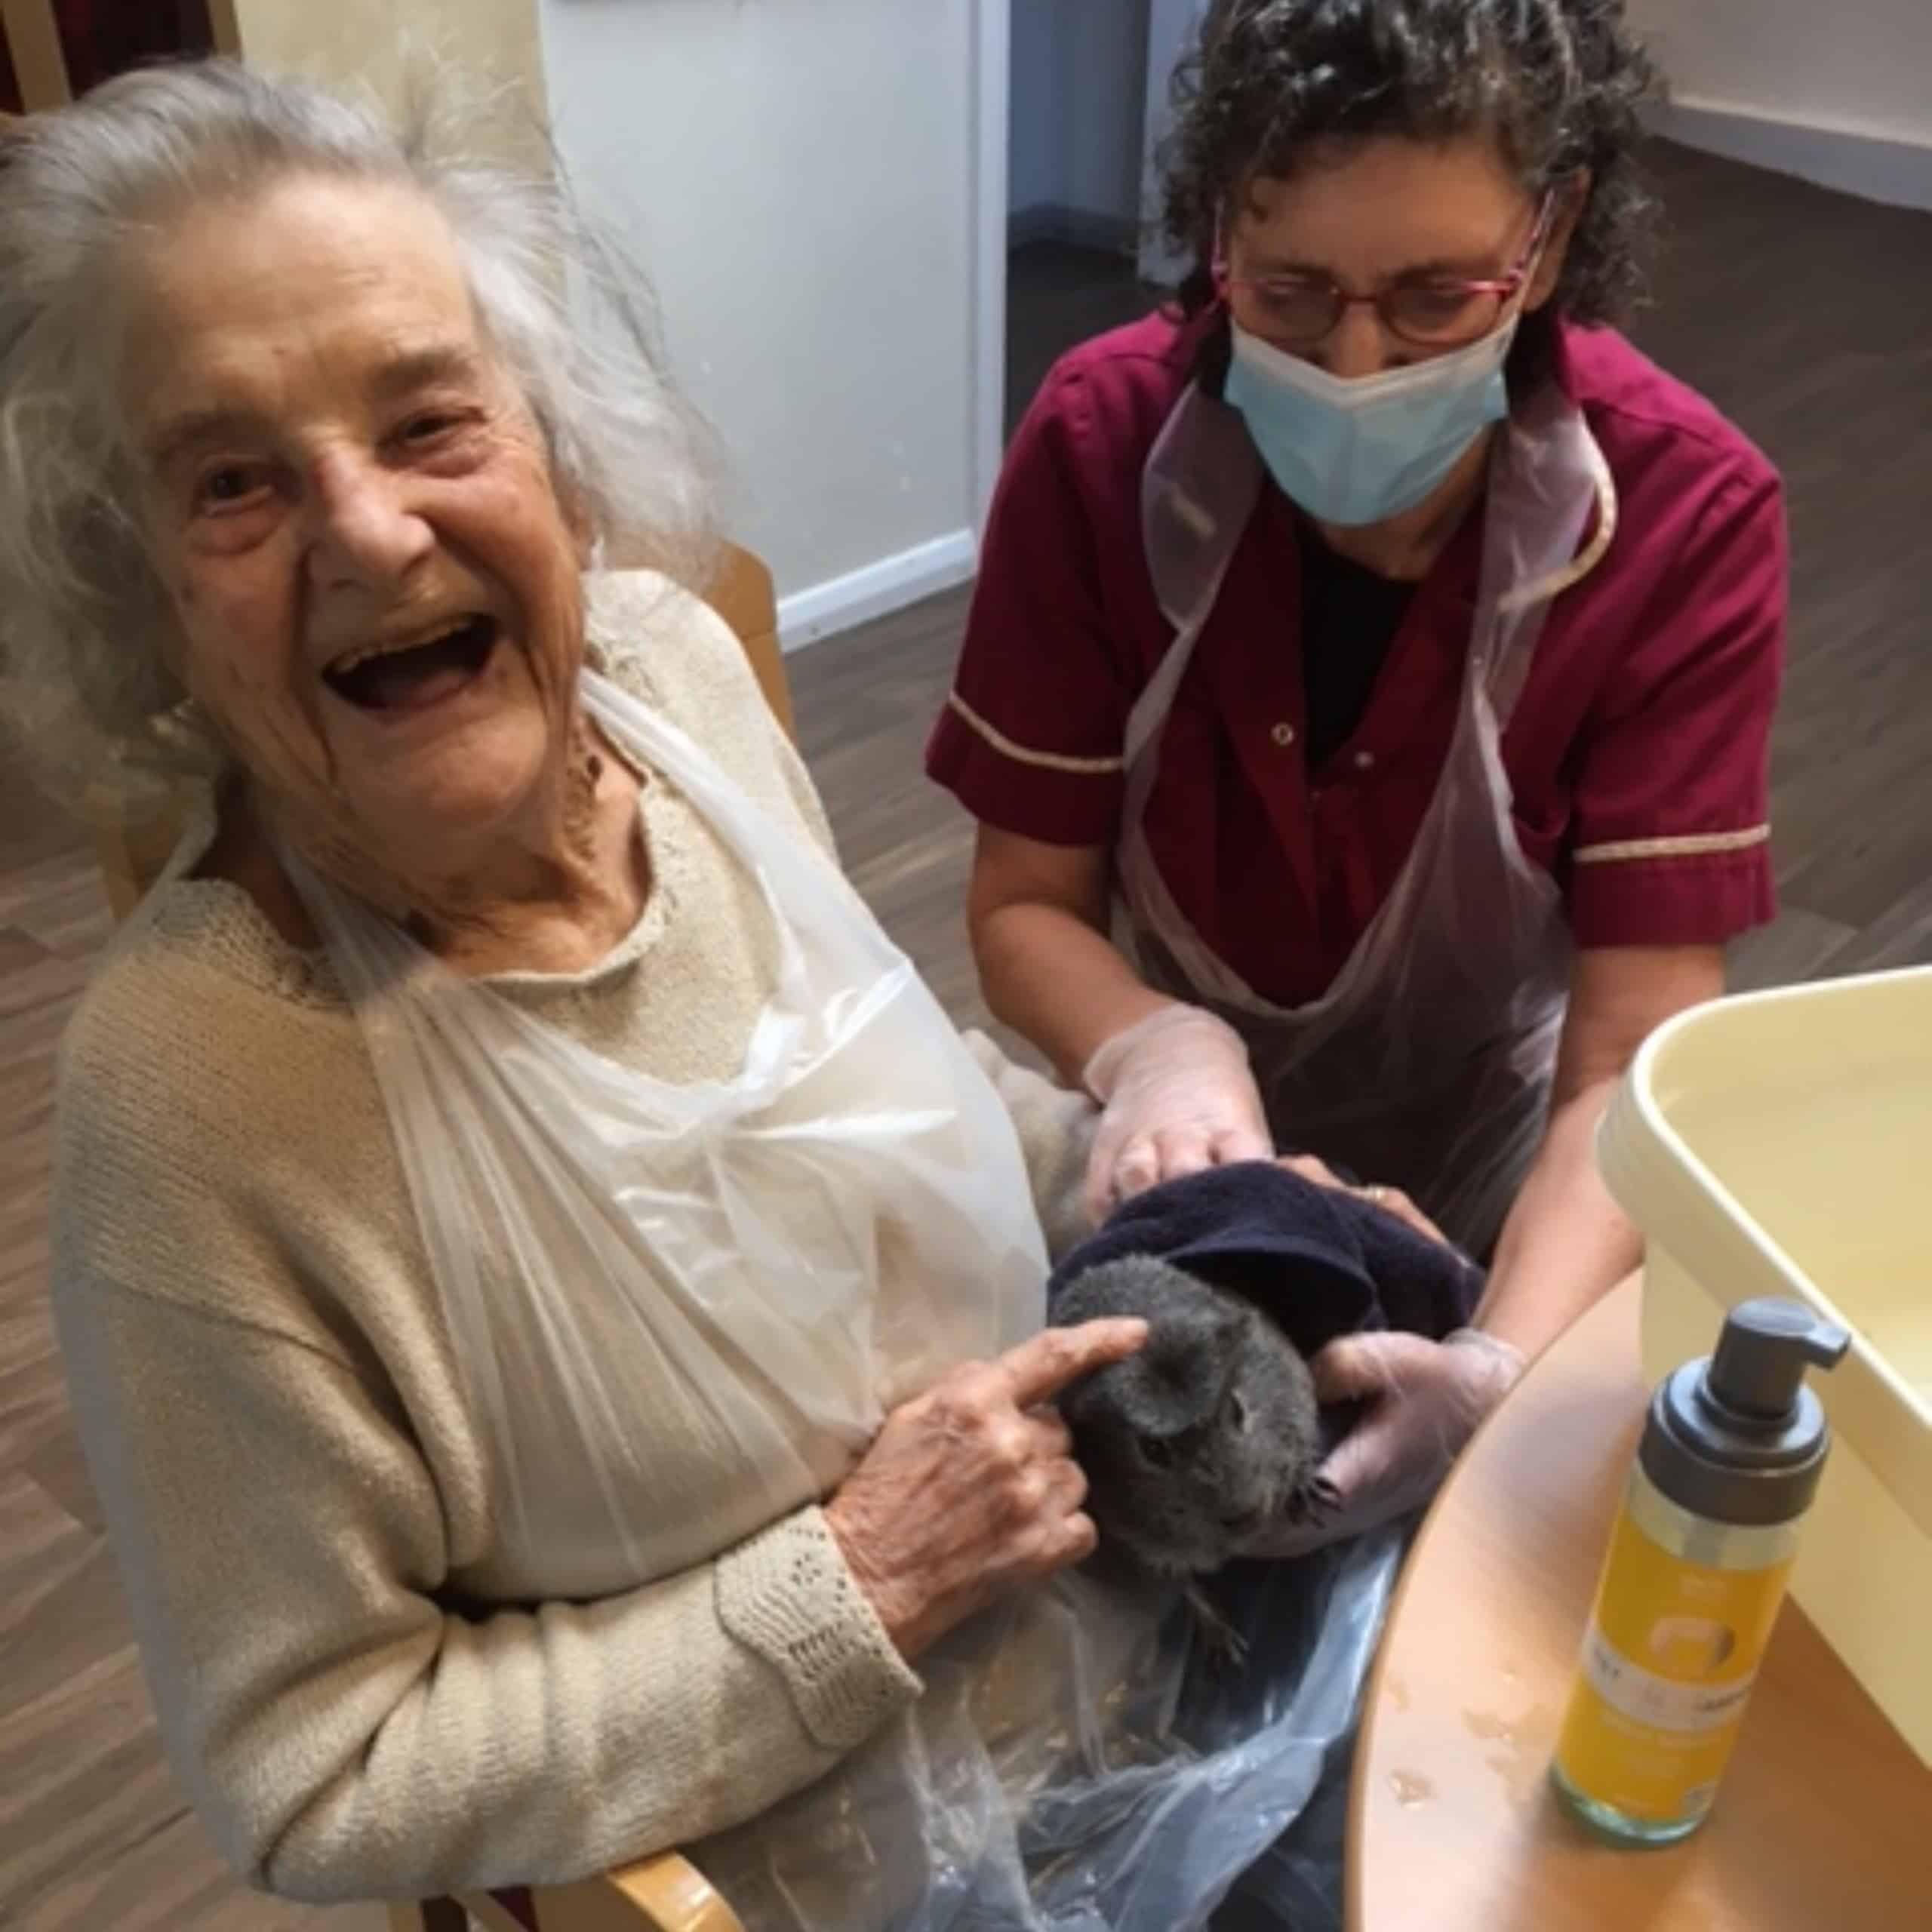 Linden House resident Joan enjoying spending time with one of the Epsom care home's pet guinea pigs.